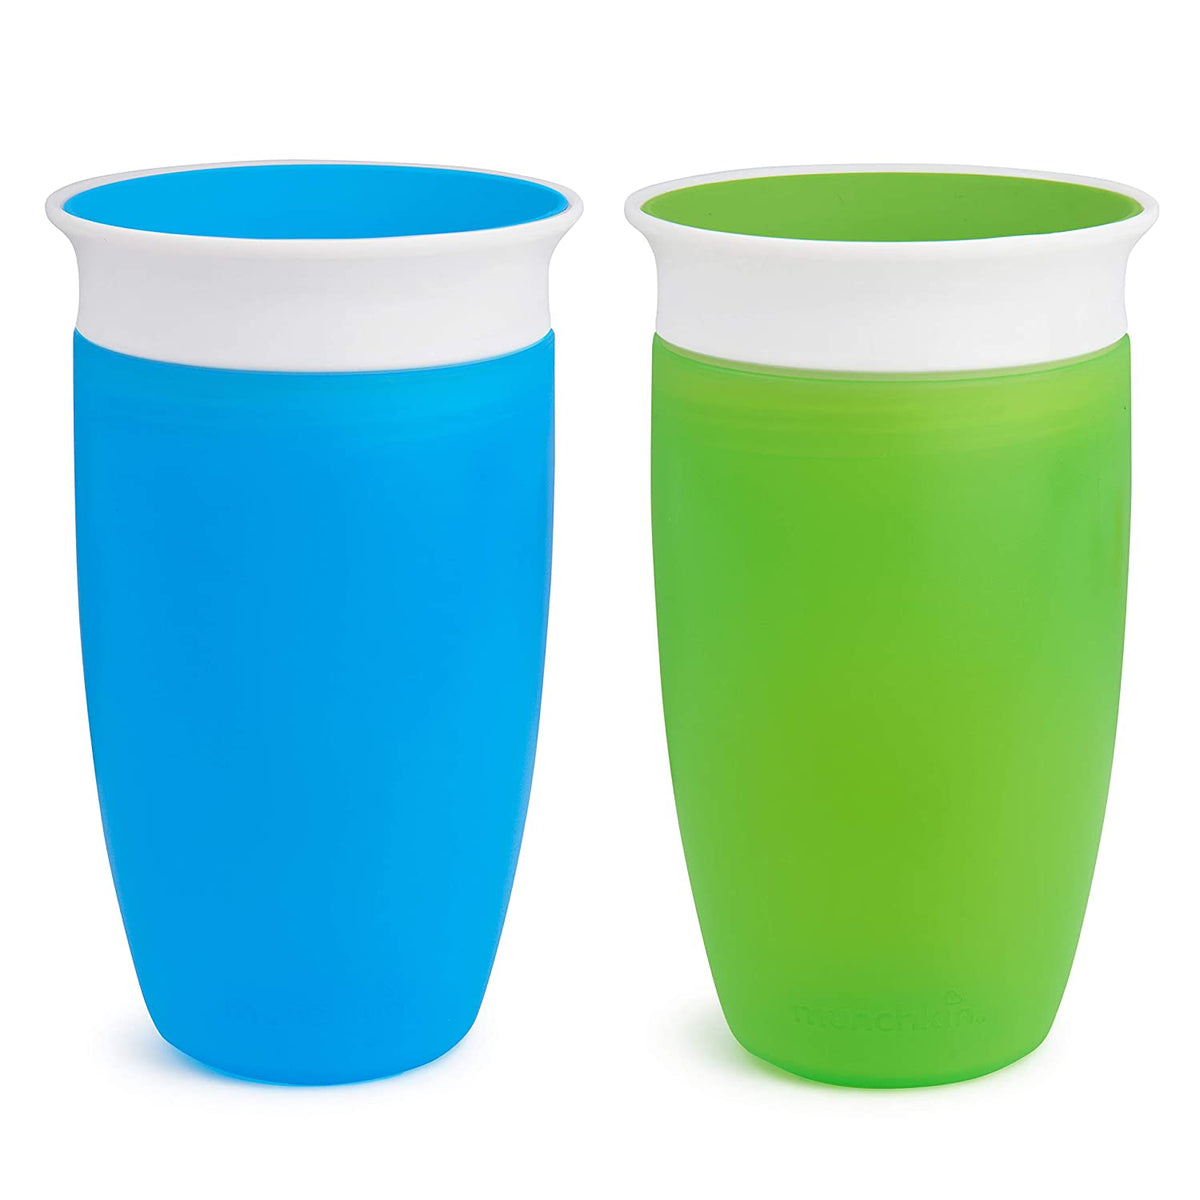 Non-Spill Sippy Cup Blue